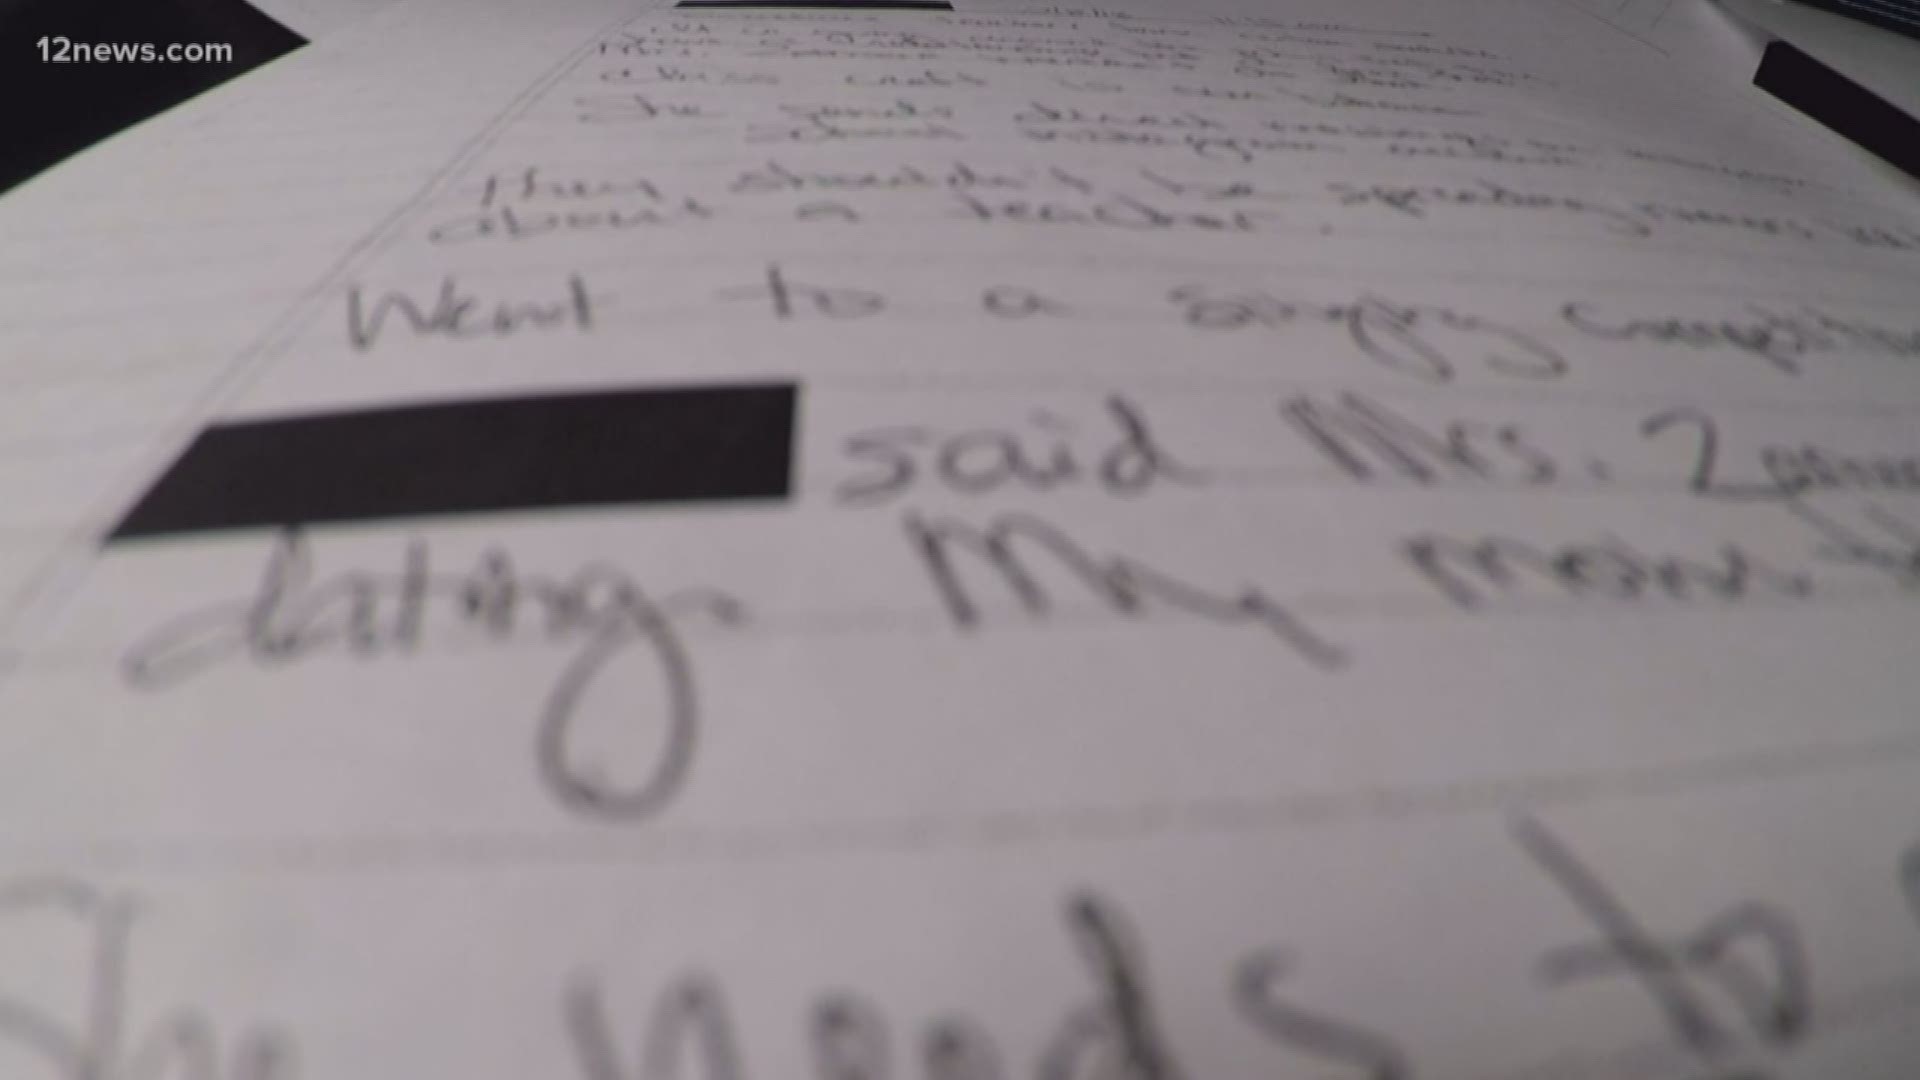 12 News obtained handwritten notes taken by the Las Brisas Academy principal. He interviewed students long before Brittany Zamora's arrest and they told him they suspected the teacher was dating the teen she is now accused of molesting.